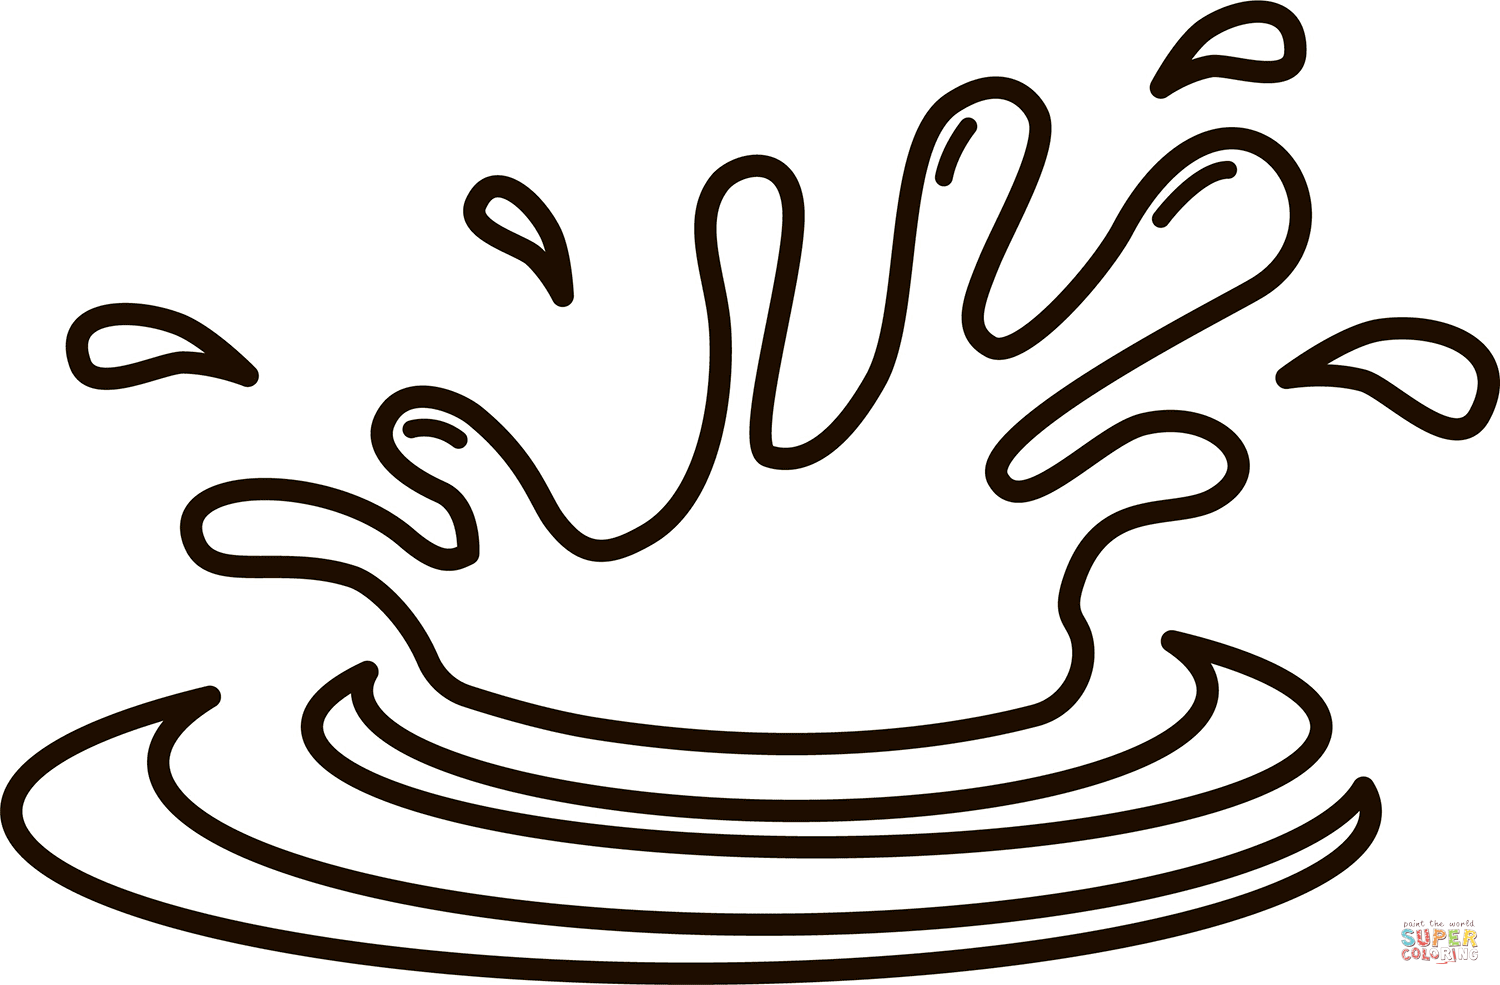 Water splash coloring page free printable coloring pages